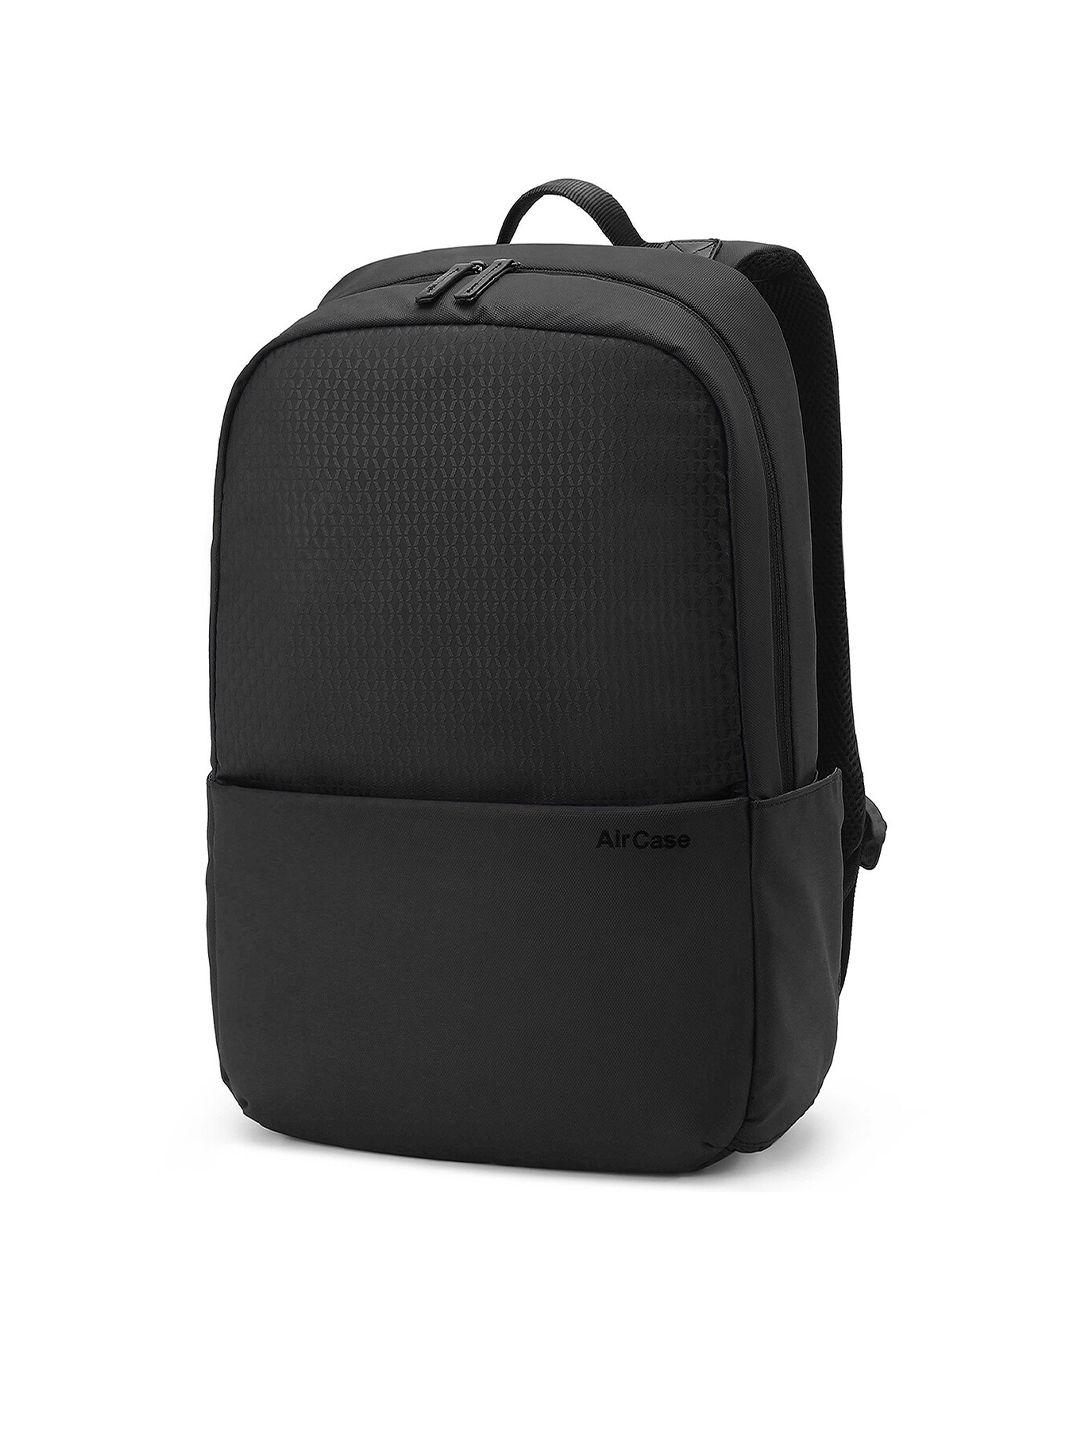 aircase spill resistant mesh laptop backpack